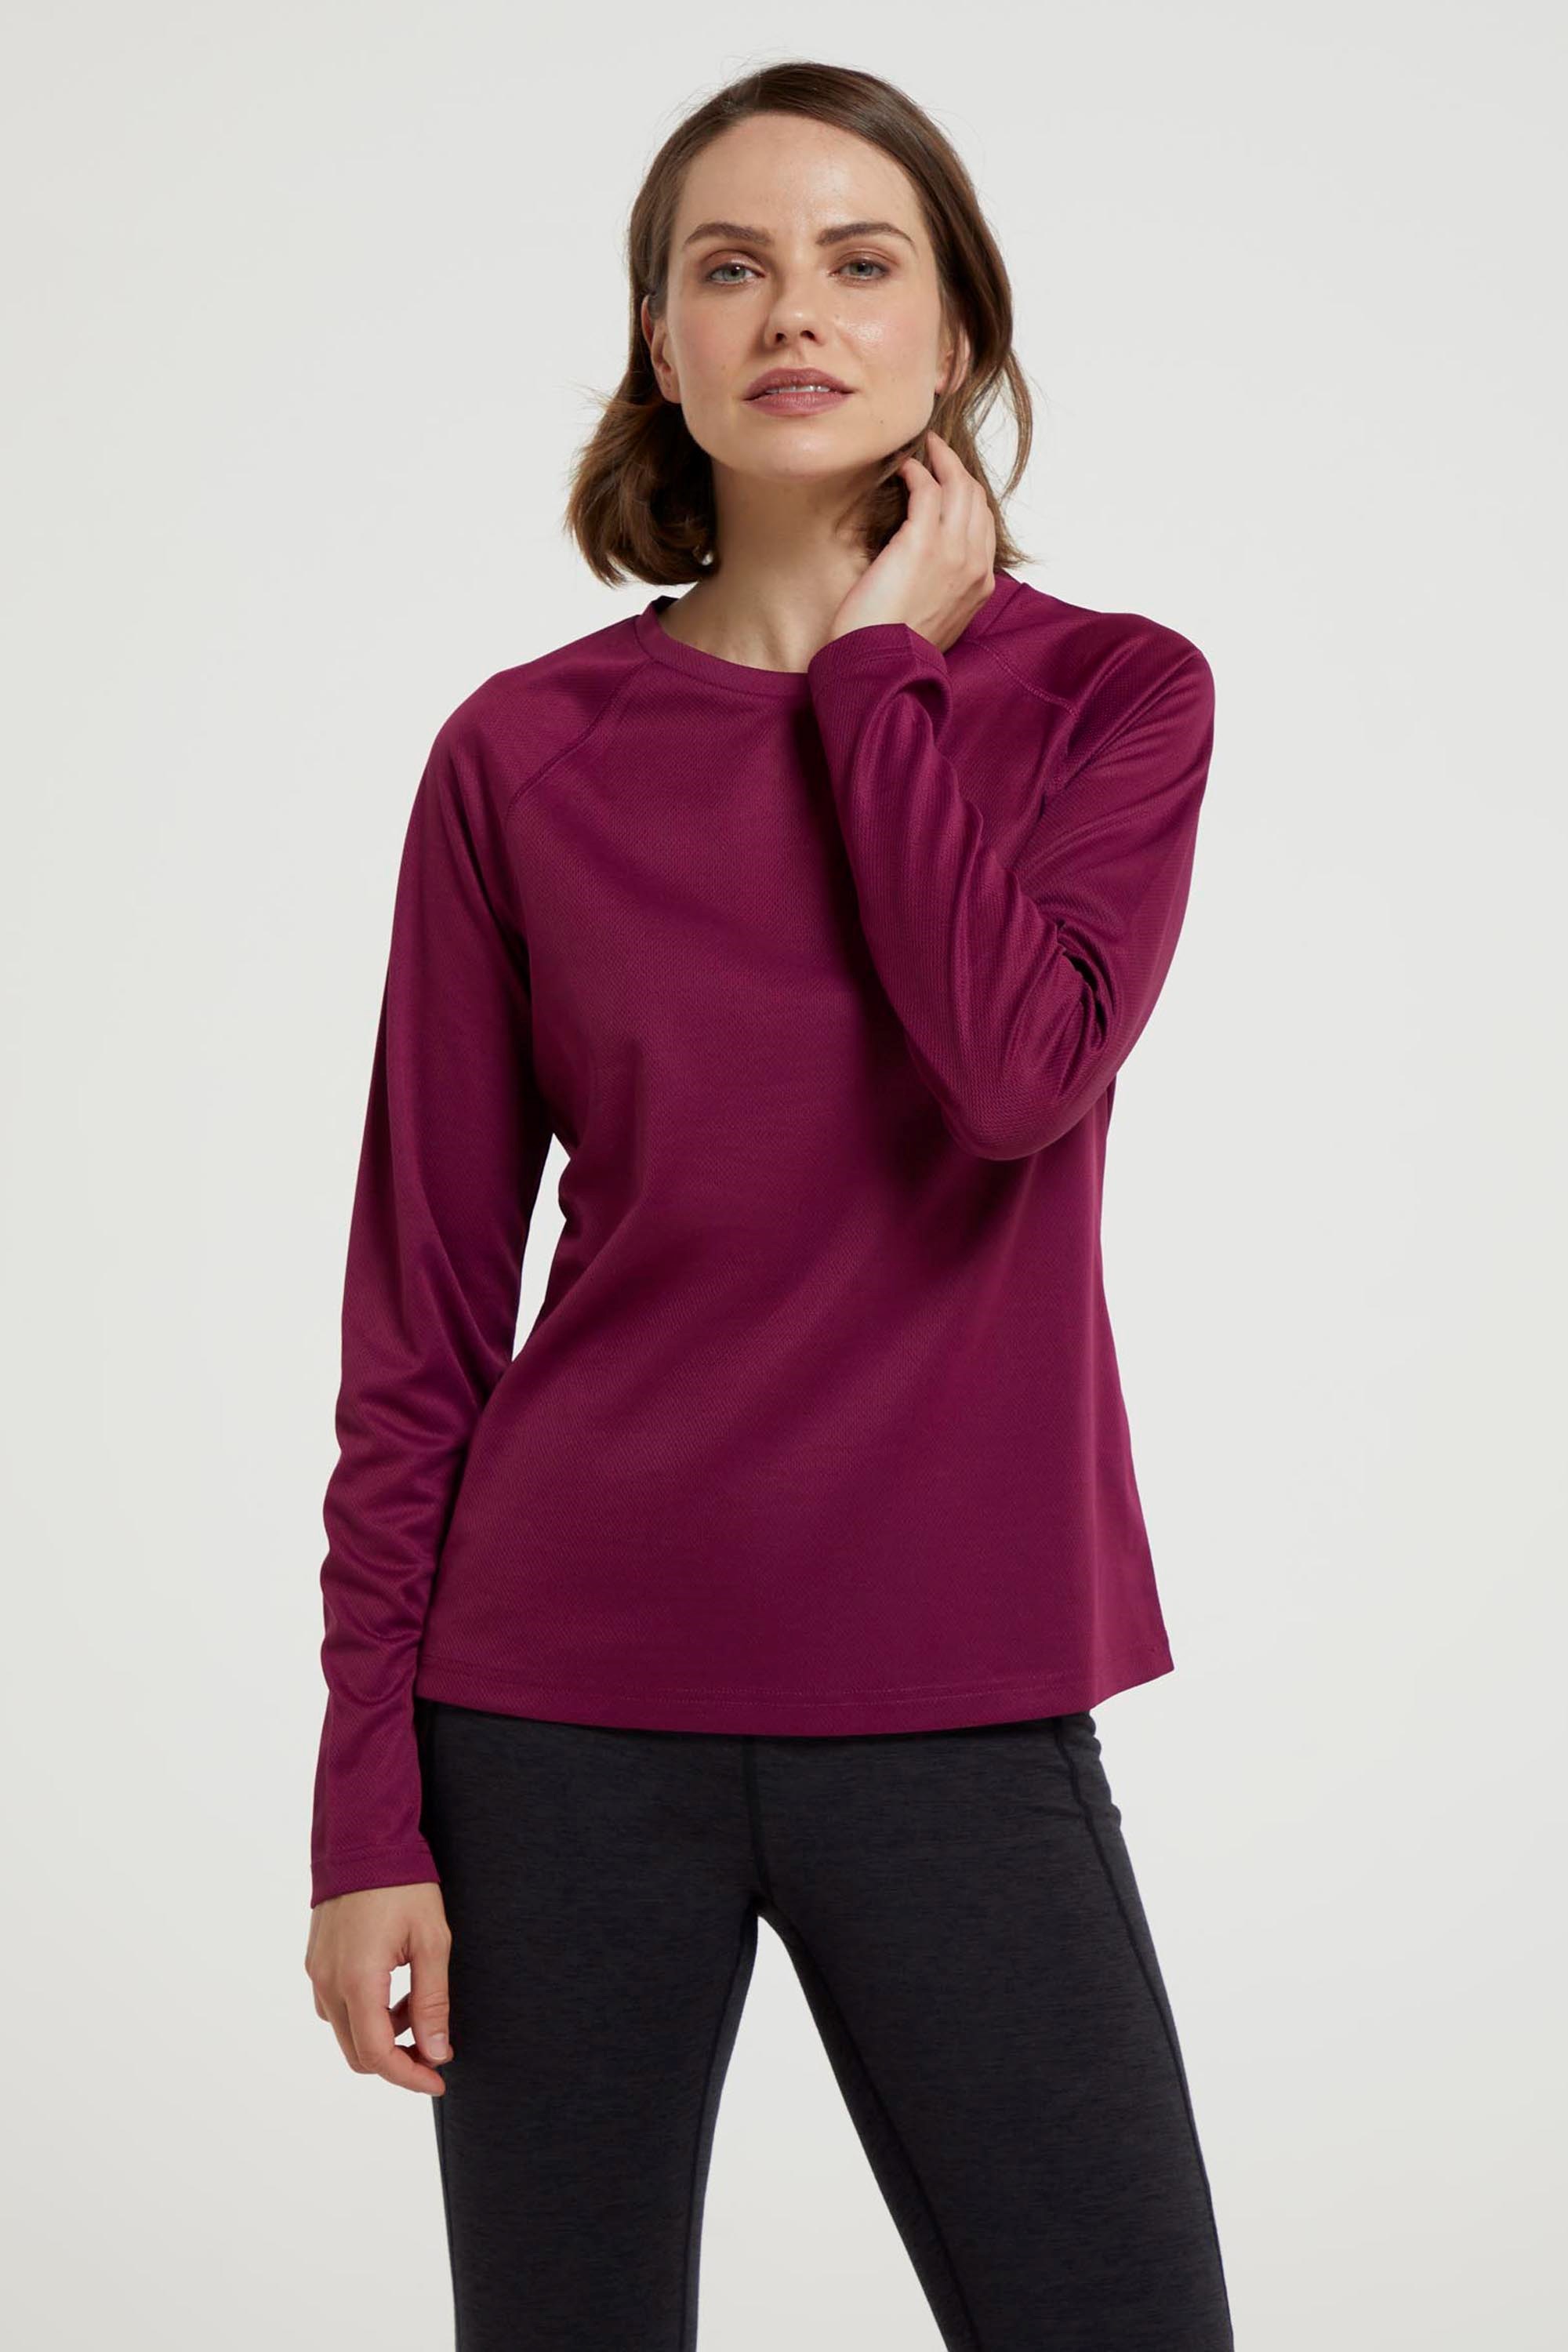 Capreze Solid Color Tees Fleece Lined Thermal Tops for Women Basic Long  Sleeve T-shirt Base Layer Stretchy Pullover Nude Color XL 